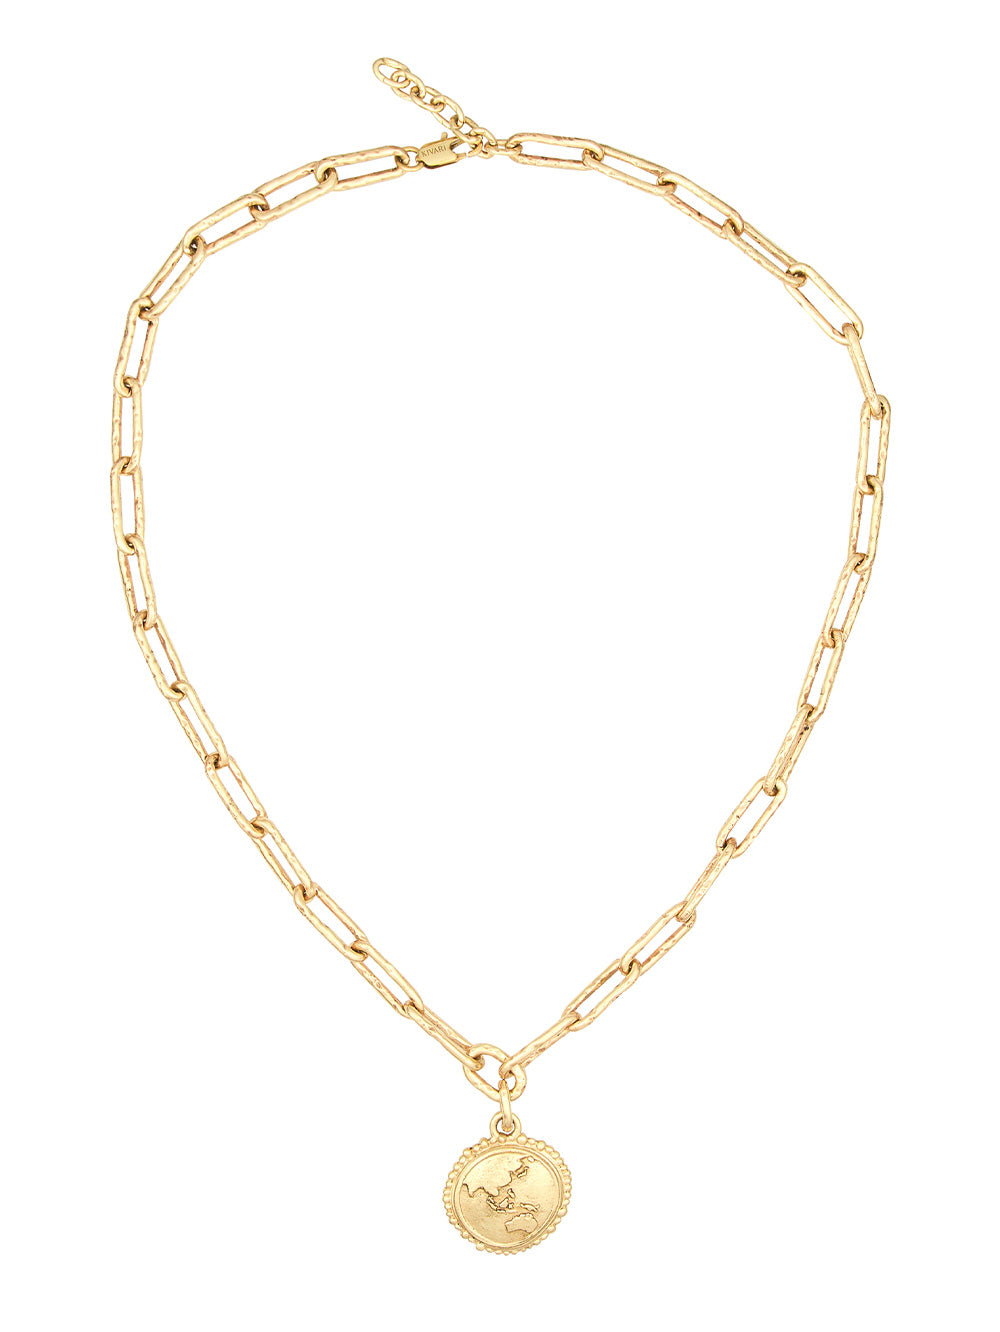 Discovery Necklace KIVARI | Gold chain necklace with pendant